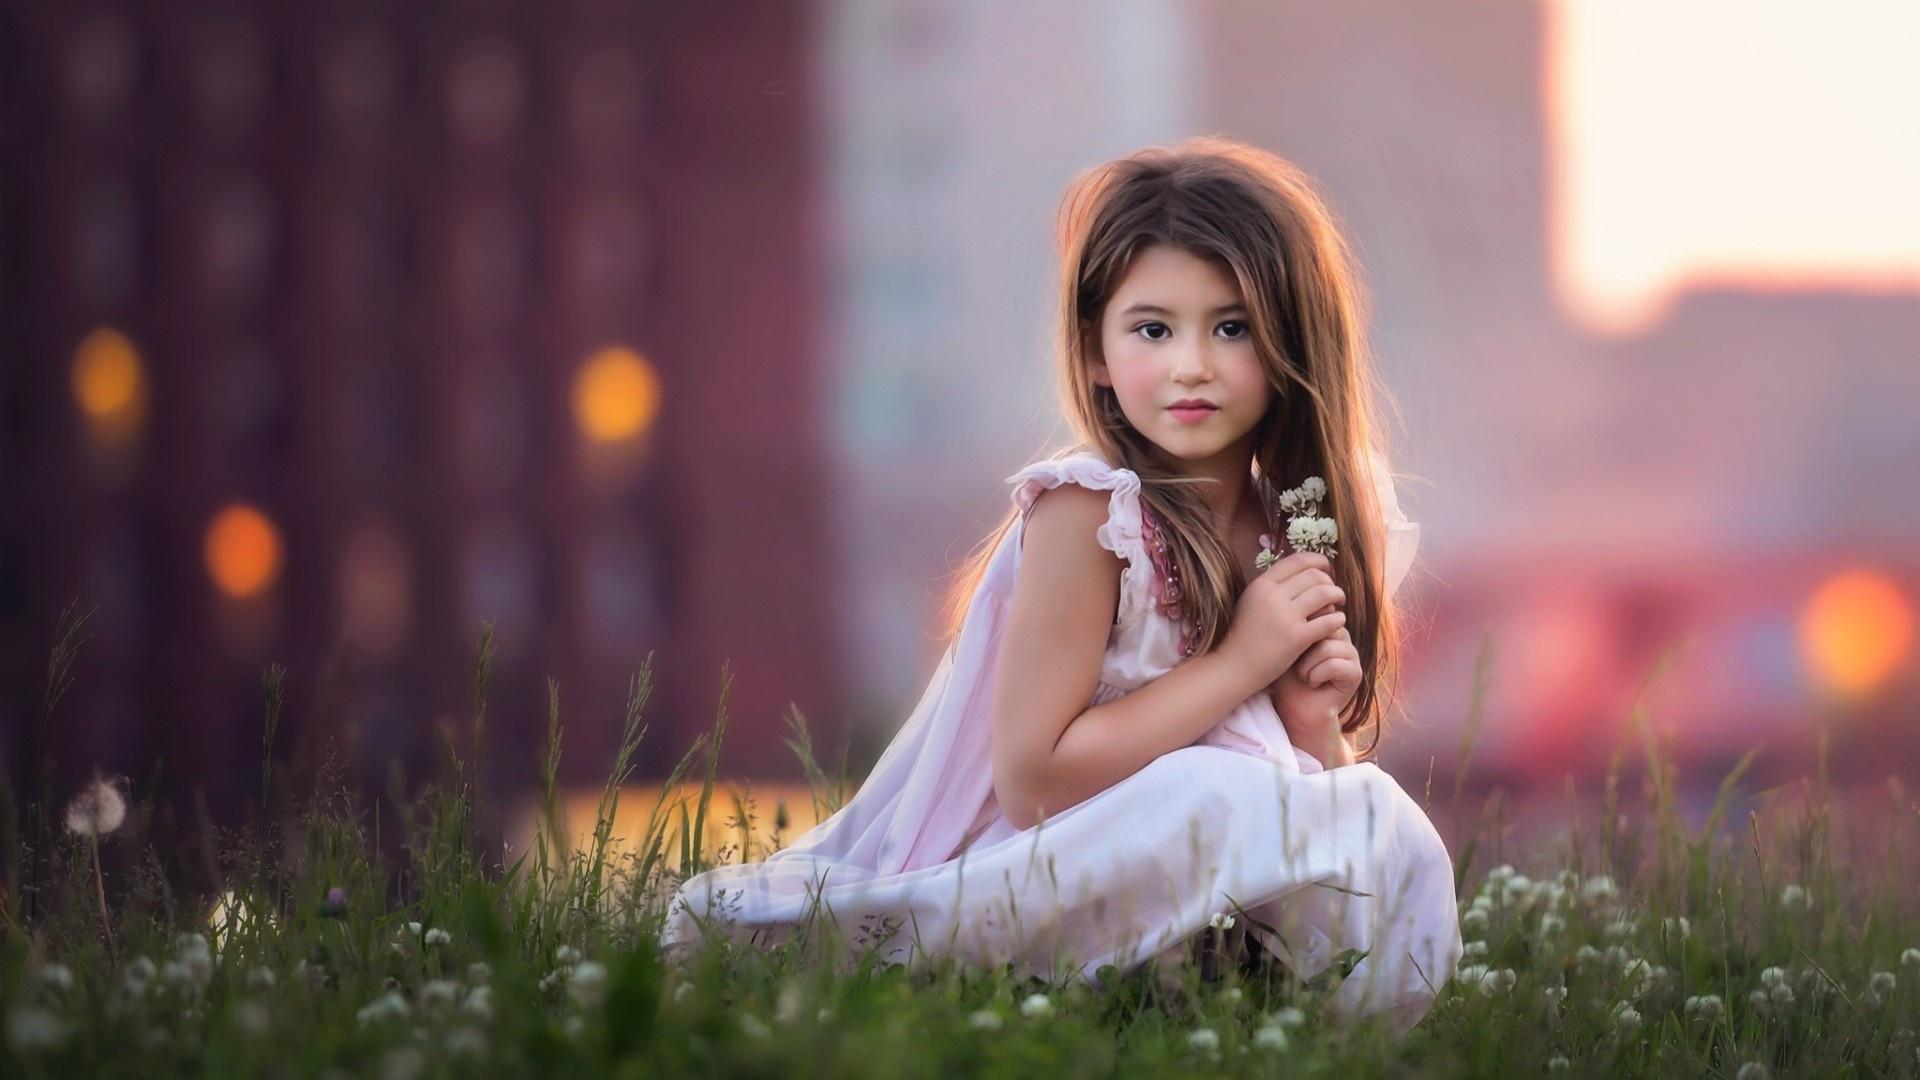 Adorable Little Girl Wallpapers - Wallpaper Cave